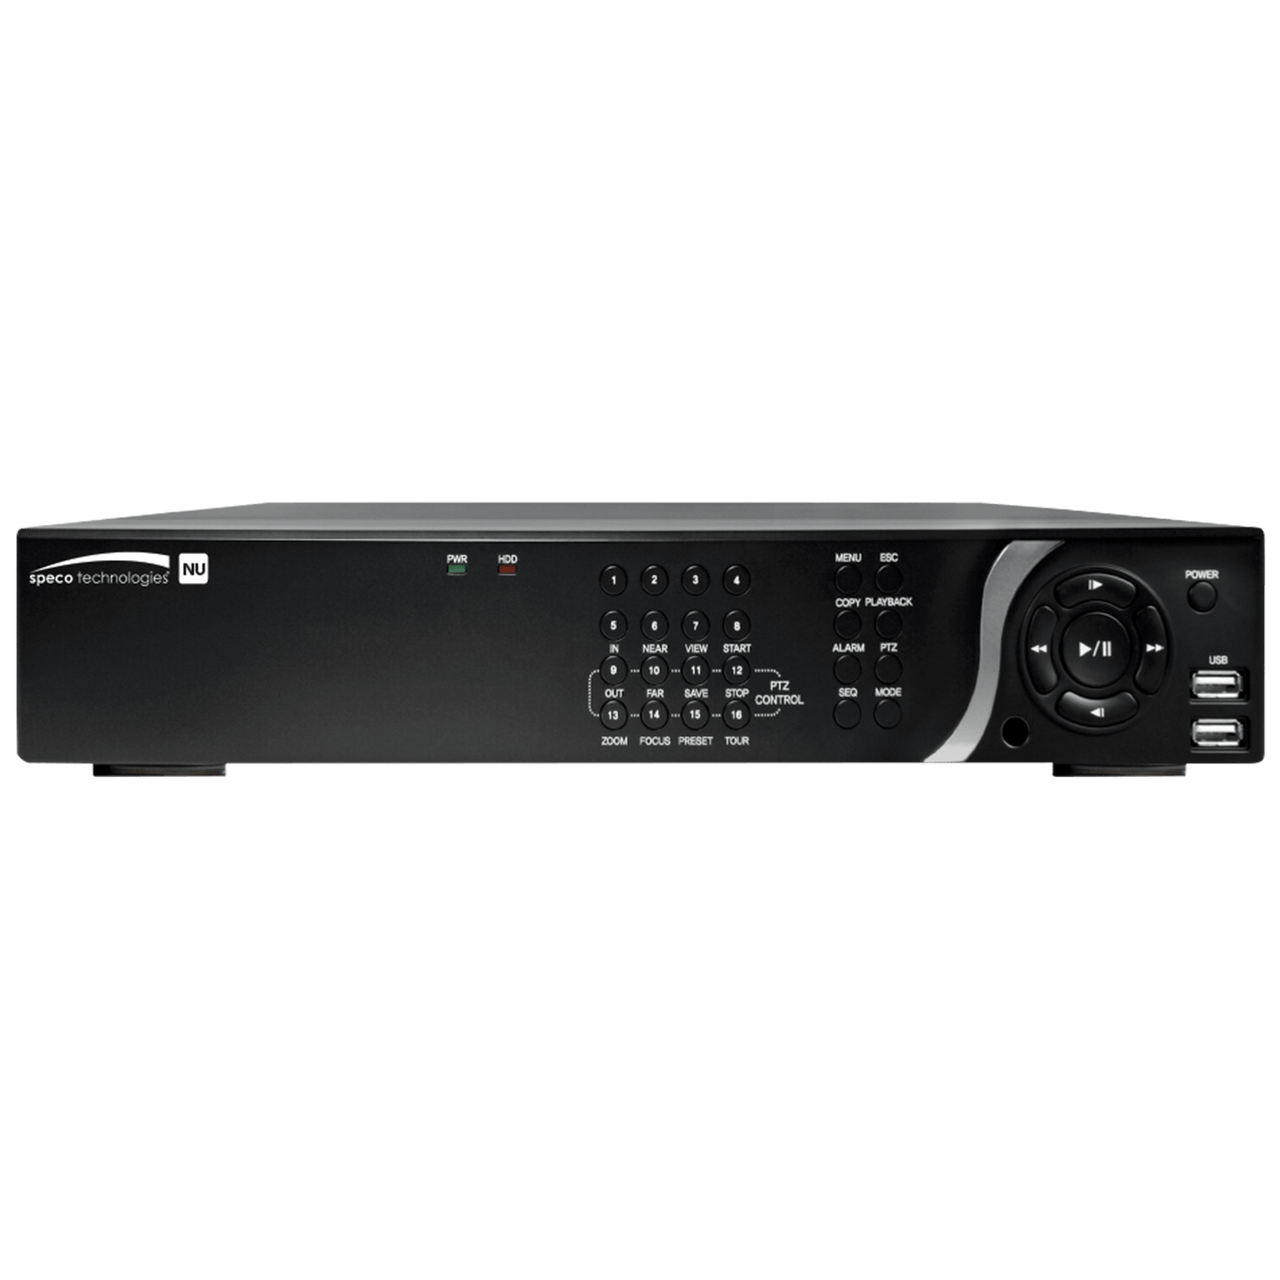 Speco Technologies SPE-N16NU8TB 16 Channel Network Server with POE, H.265, 4K- 8TB, TAA (SPE-N16NU8TB)